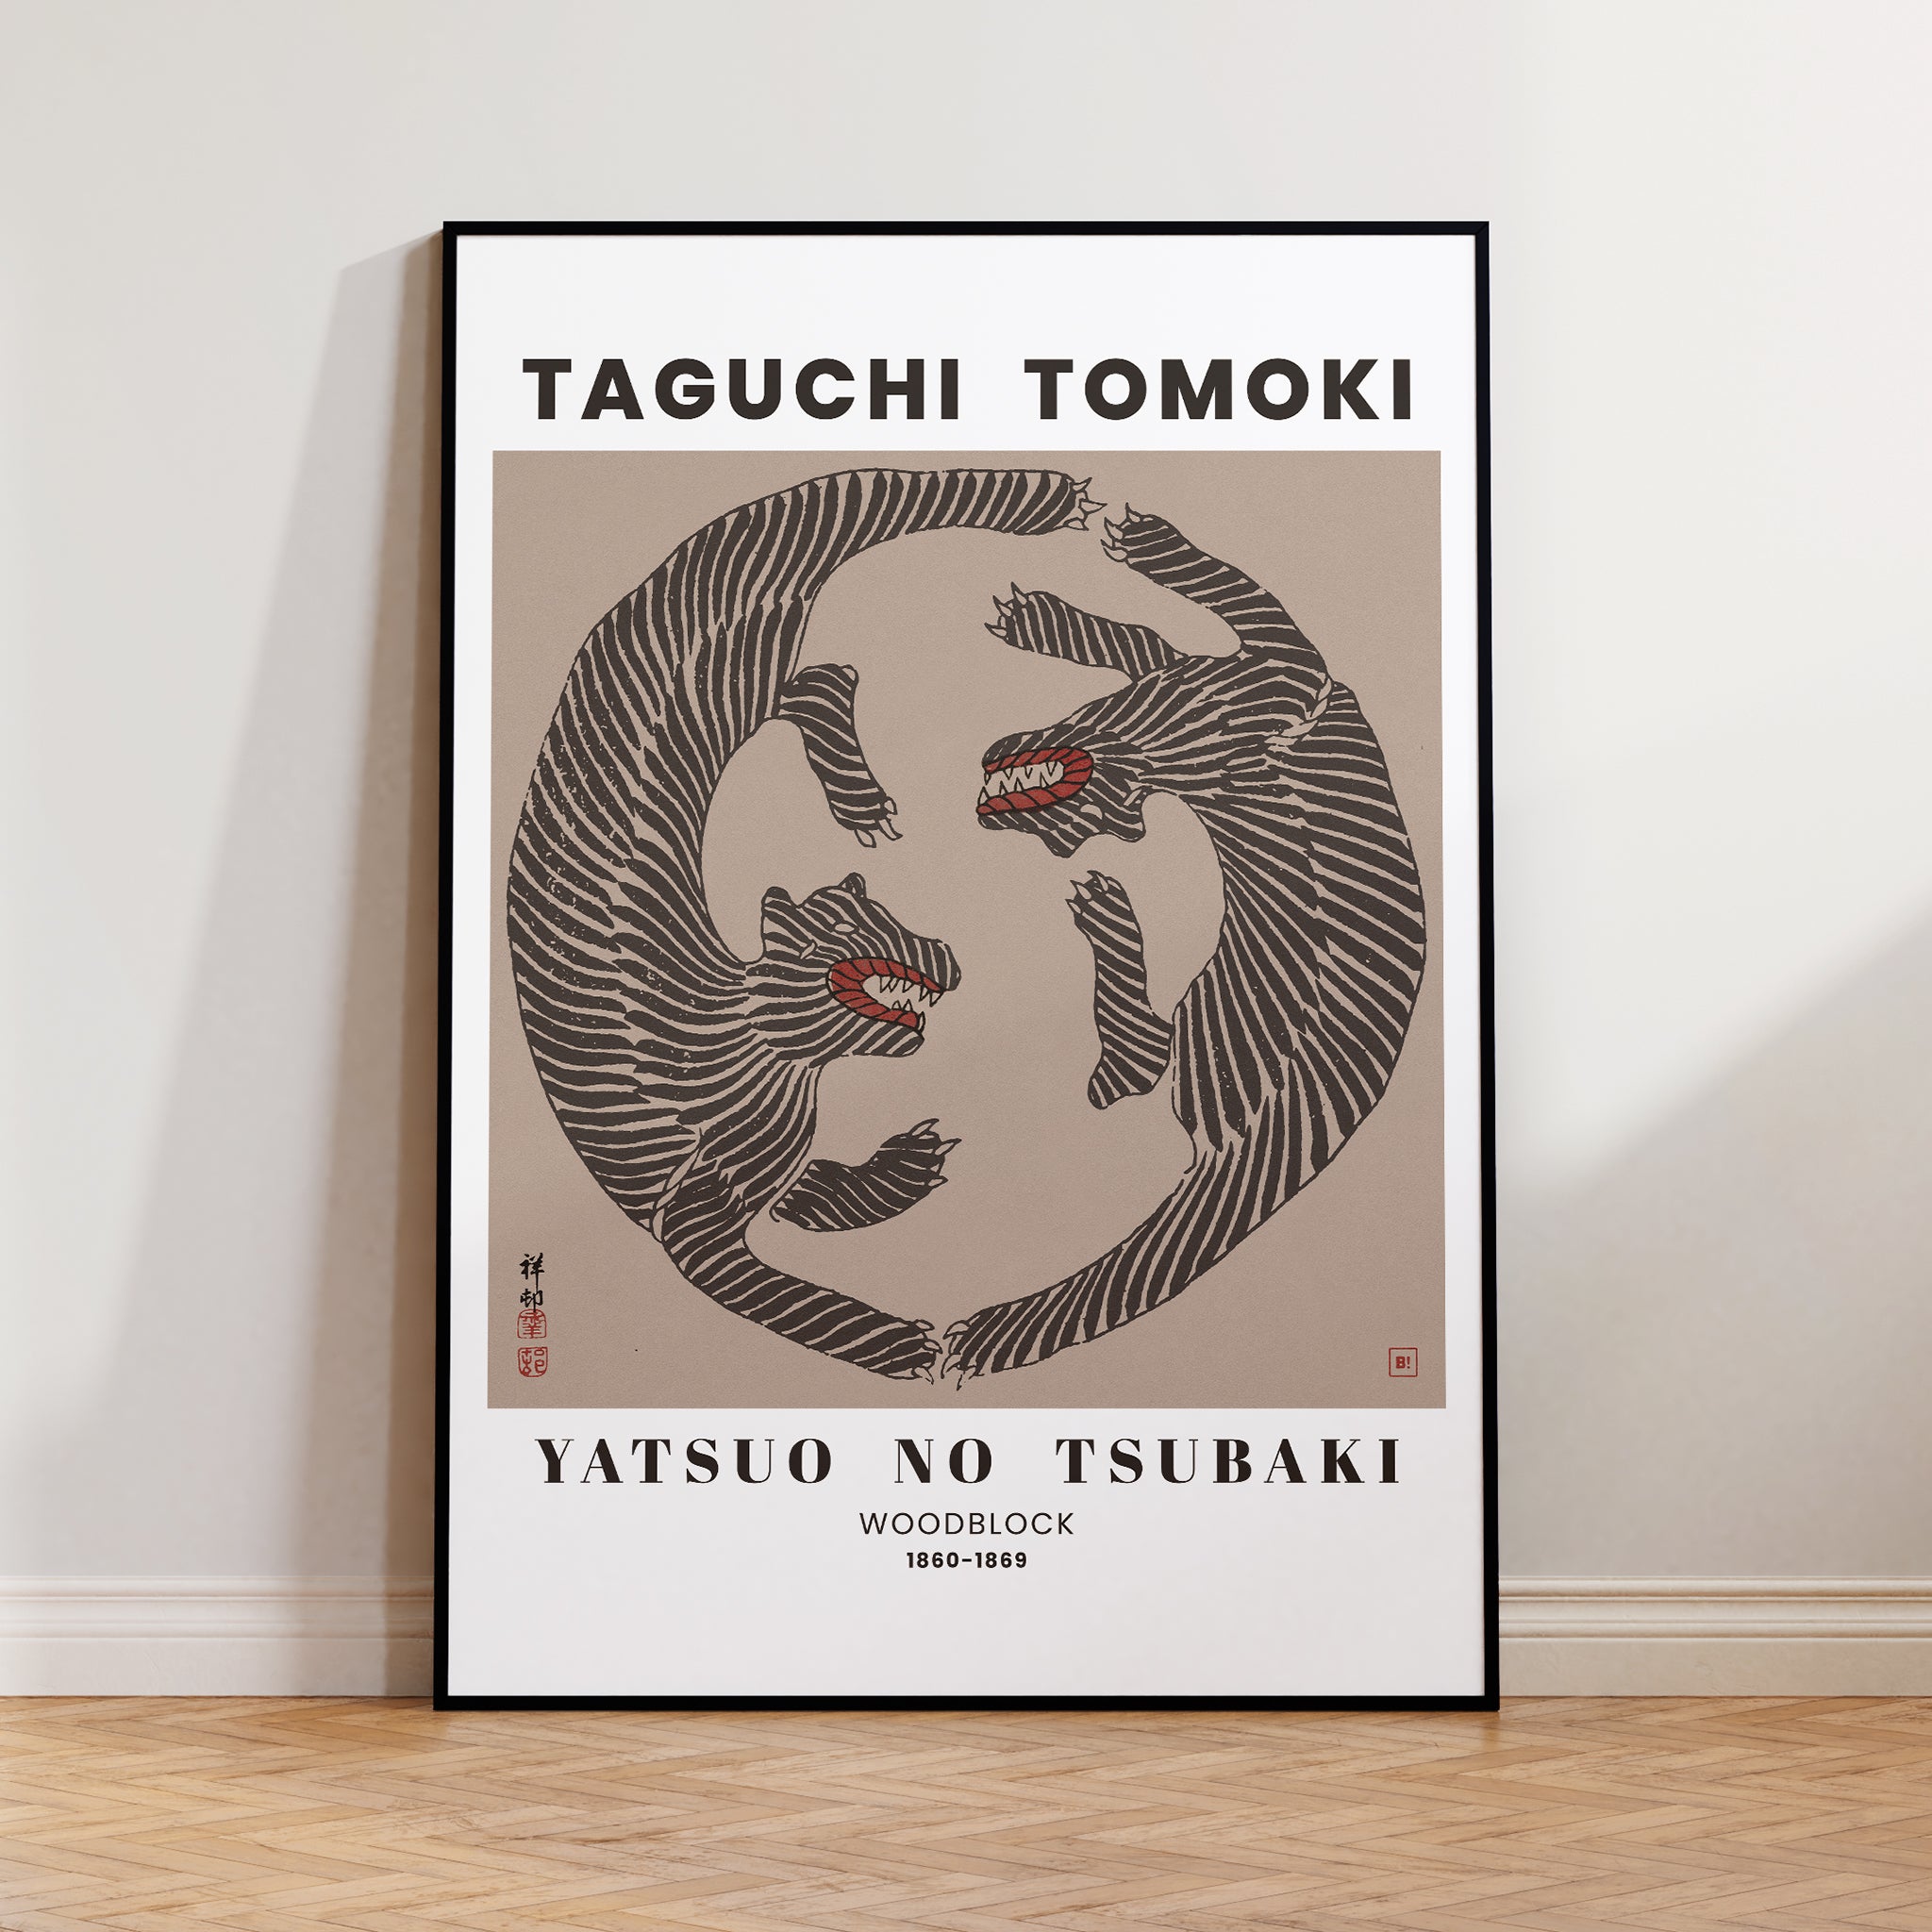 Be inspired by our remastered Taguchi Tomoki Woodblock Tigers Terracotta exhibition art print. This artwork was printed using the giclée process on archival acid-free paper and is presented in a modern black frame that captures its timeless beauty in every detail.